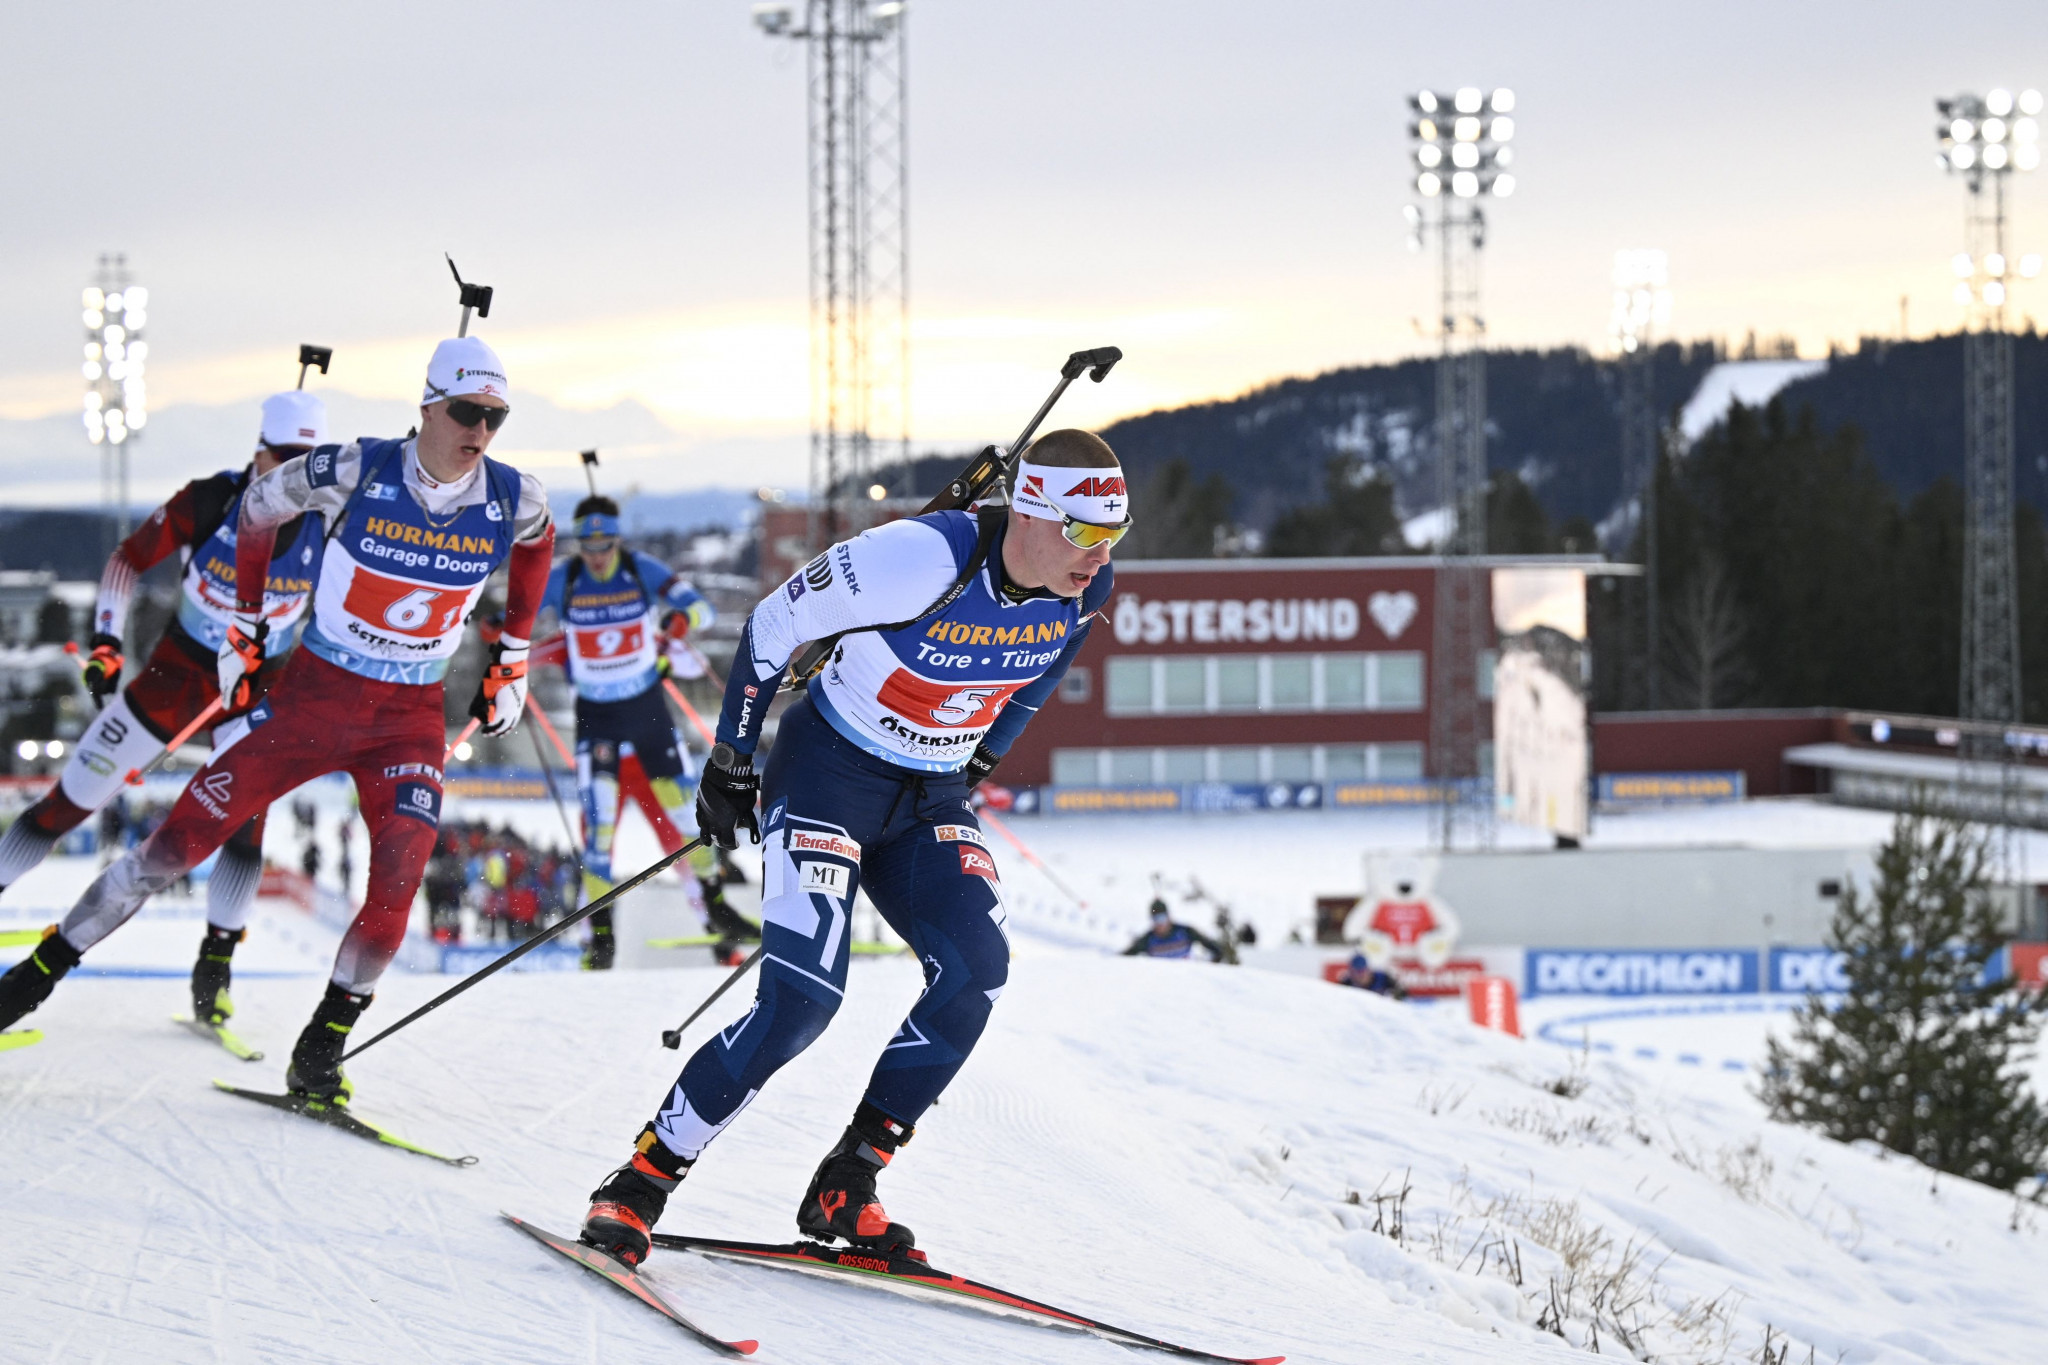 Östersund in Sweden is due to host the first event of the 2023-2024 season from November 25 to December 3 ©Getty Images